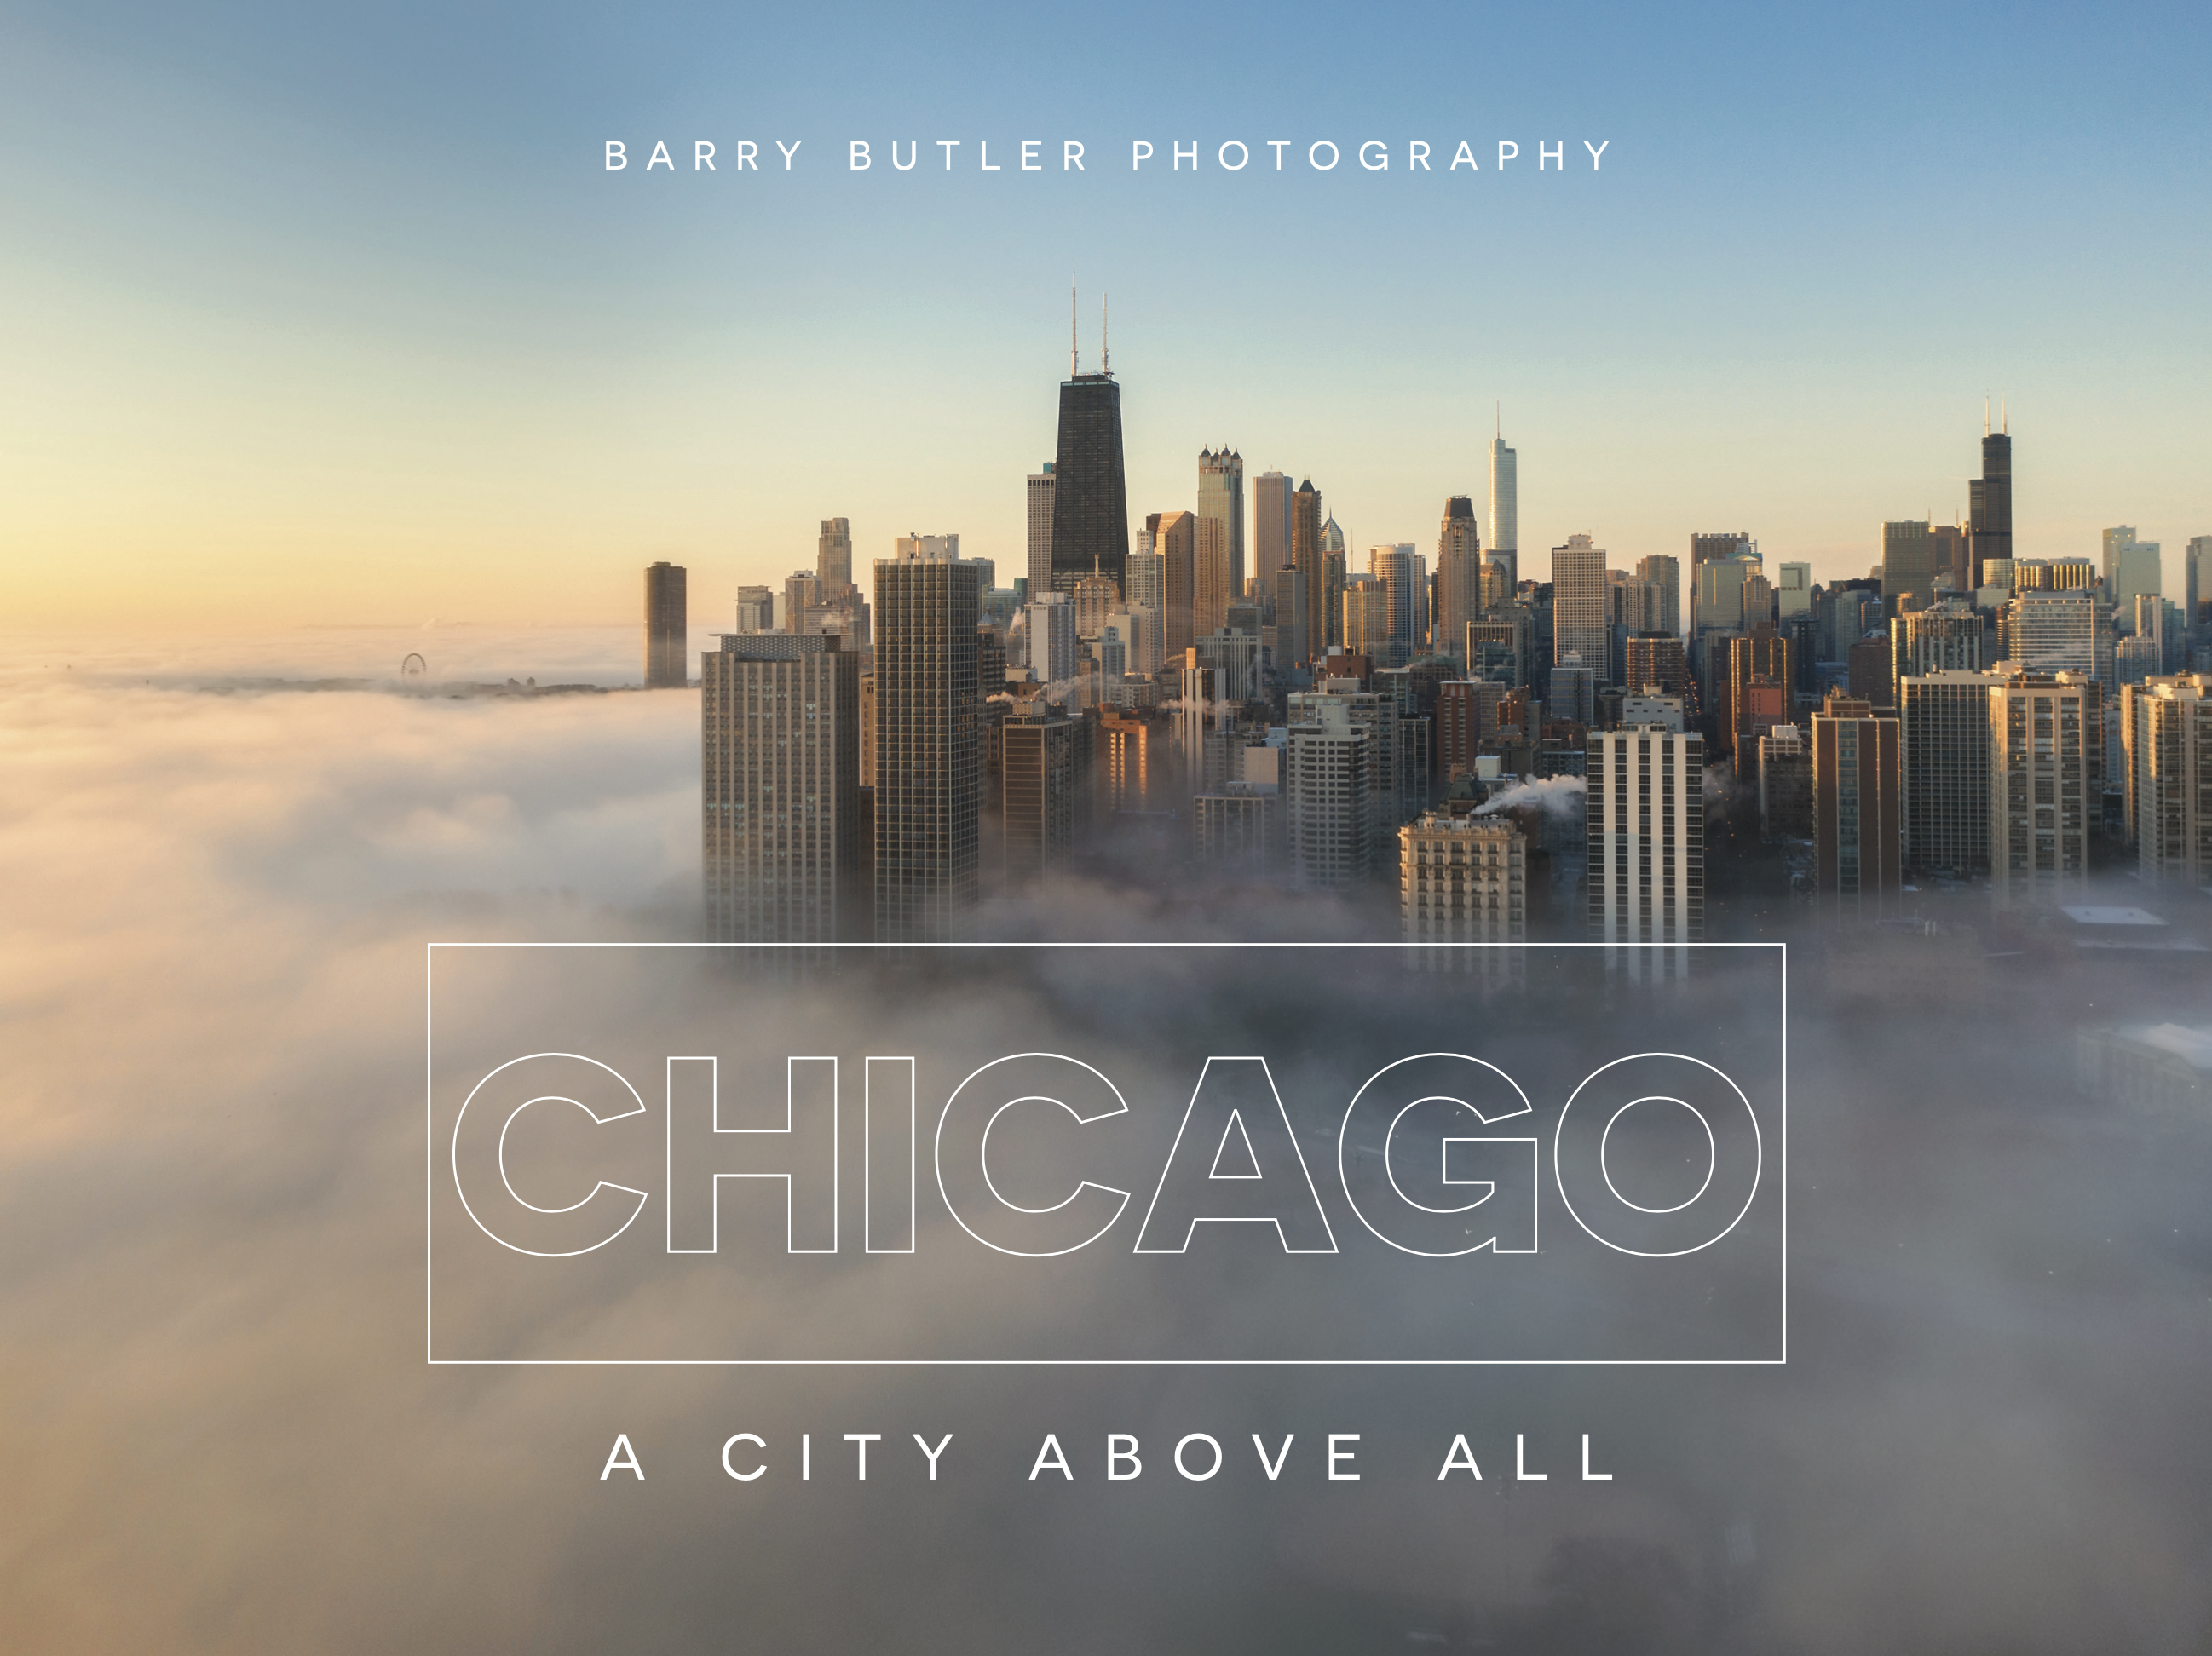 "Chicago" book cover